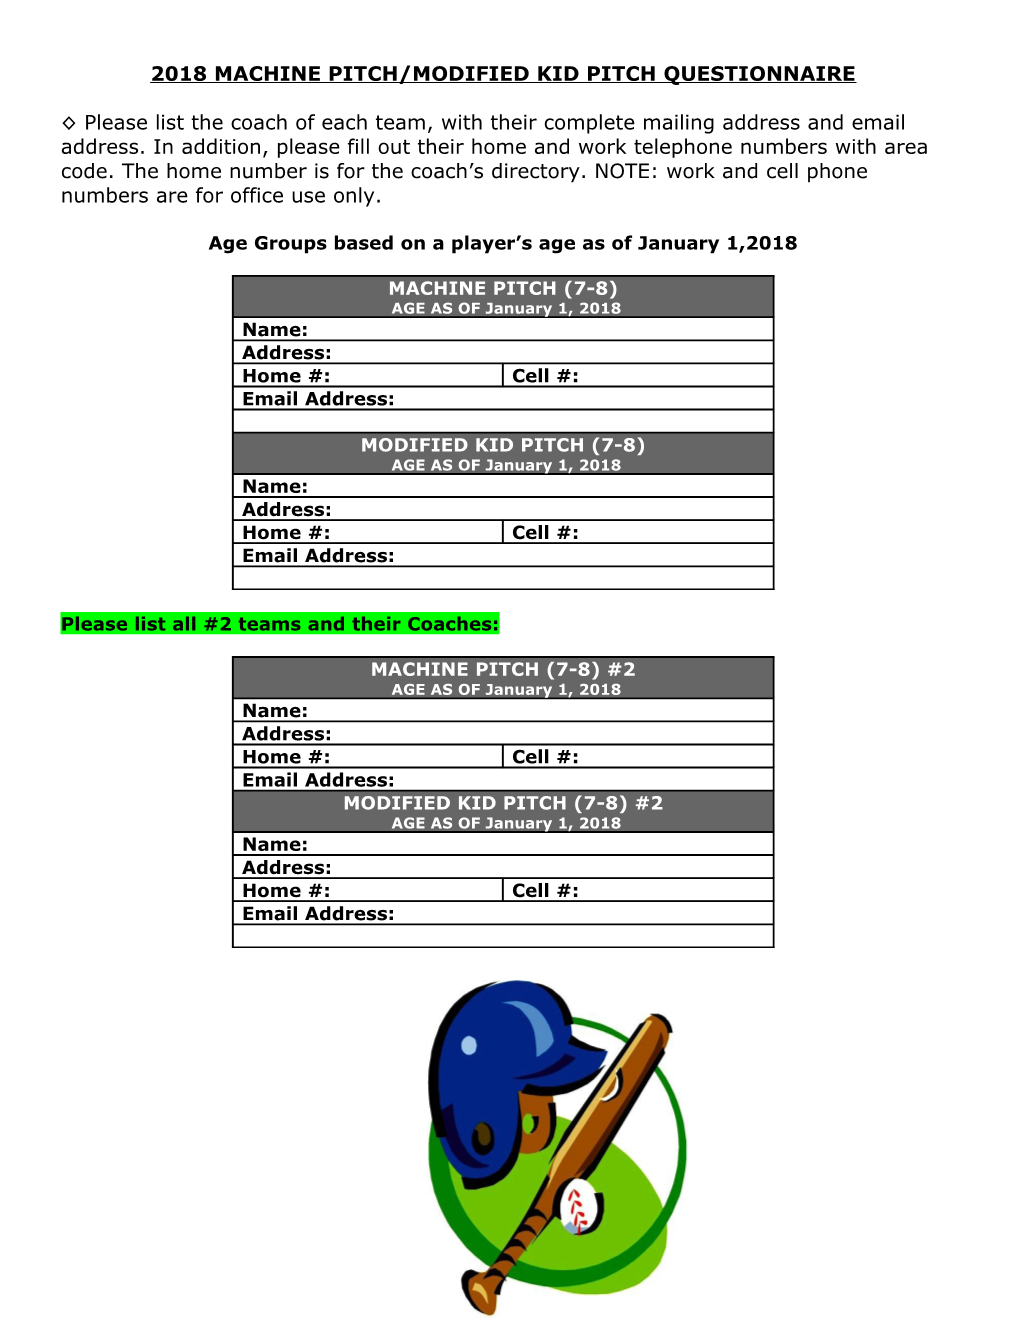 2018ROOKIE LEAGUE(MACHINE PITCH Or MODIFIED KID PITCH) QUESTIONNAIRE